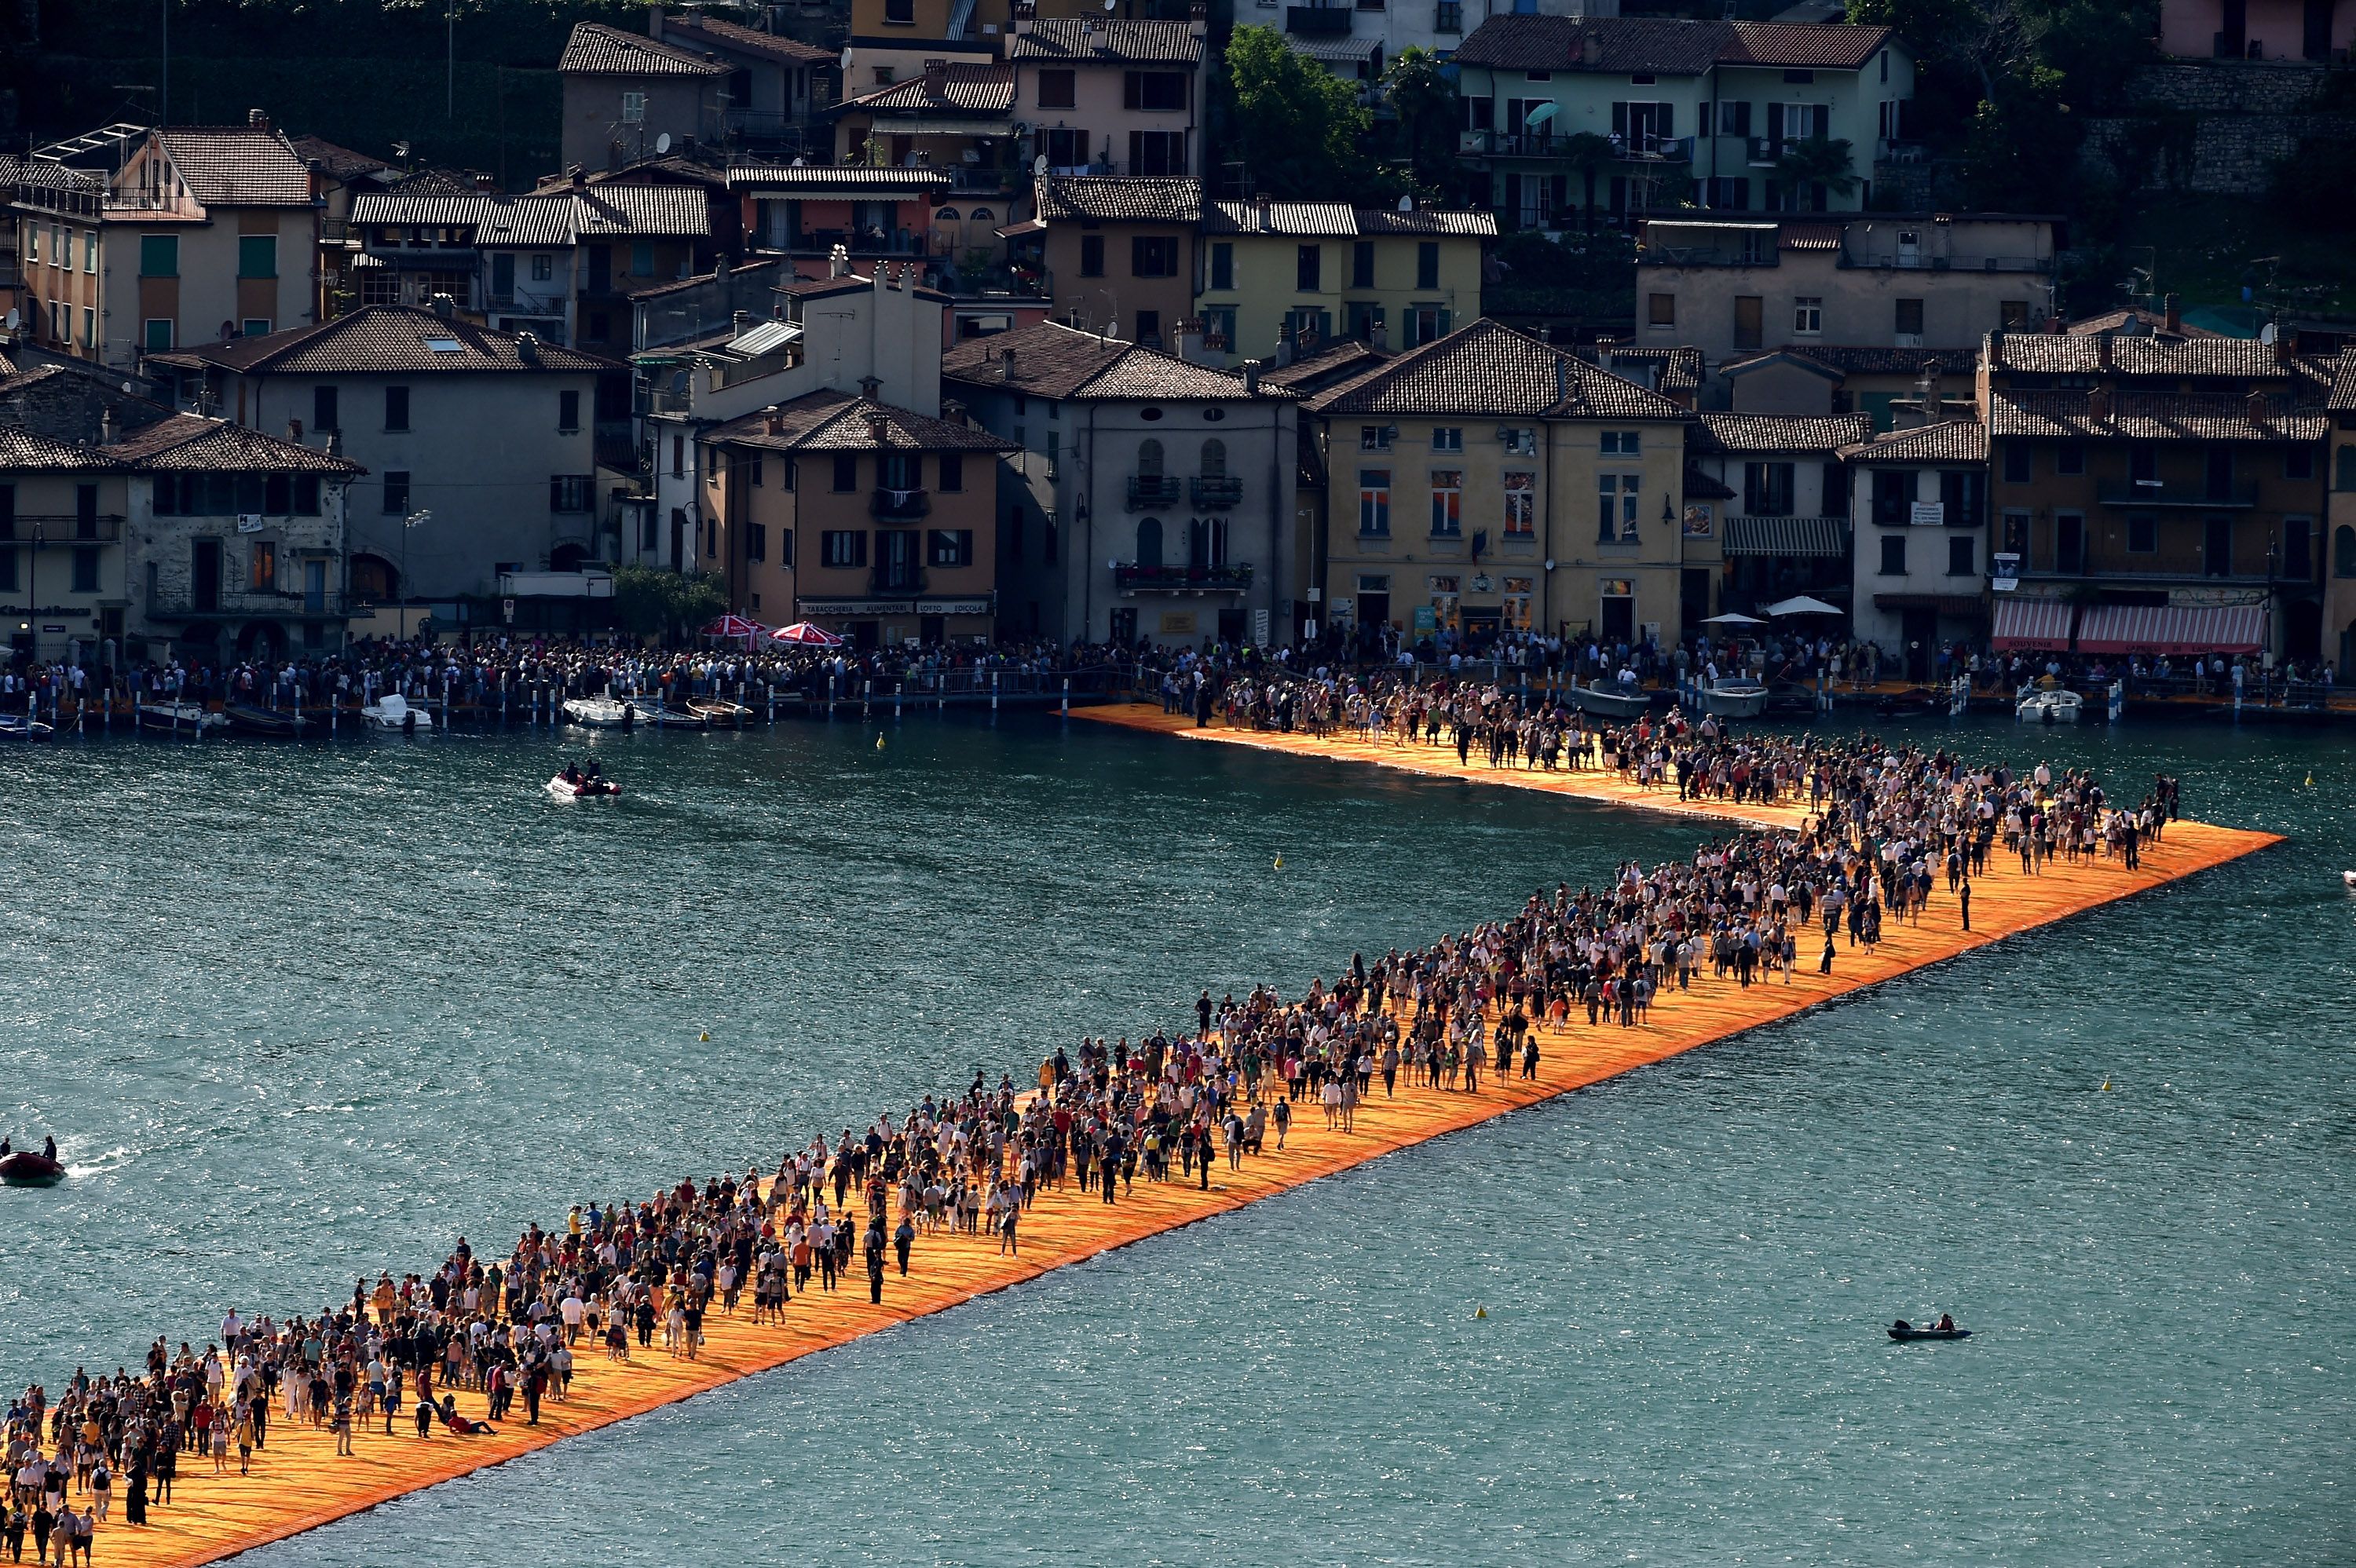 The Floating Piers Christo Floating Piers Lake Iseo Italy